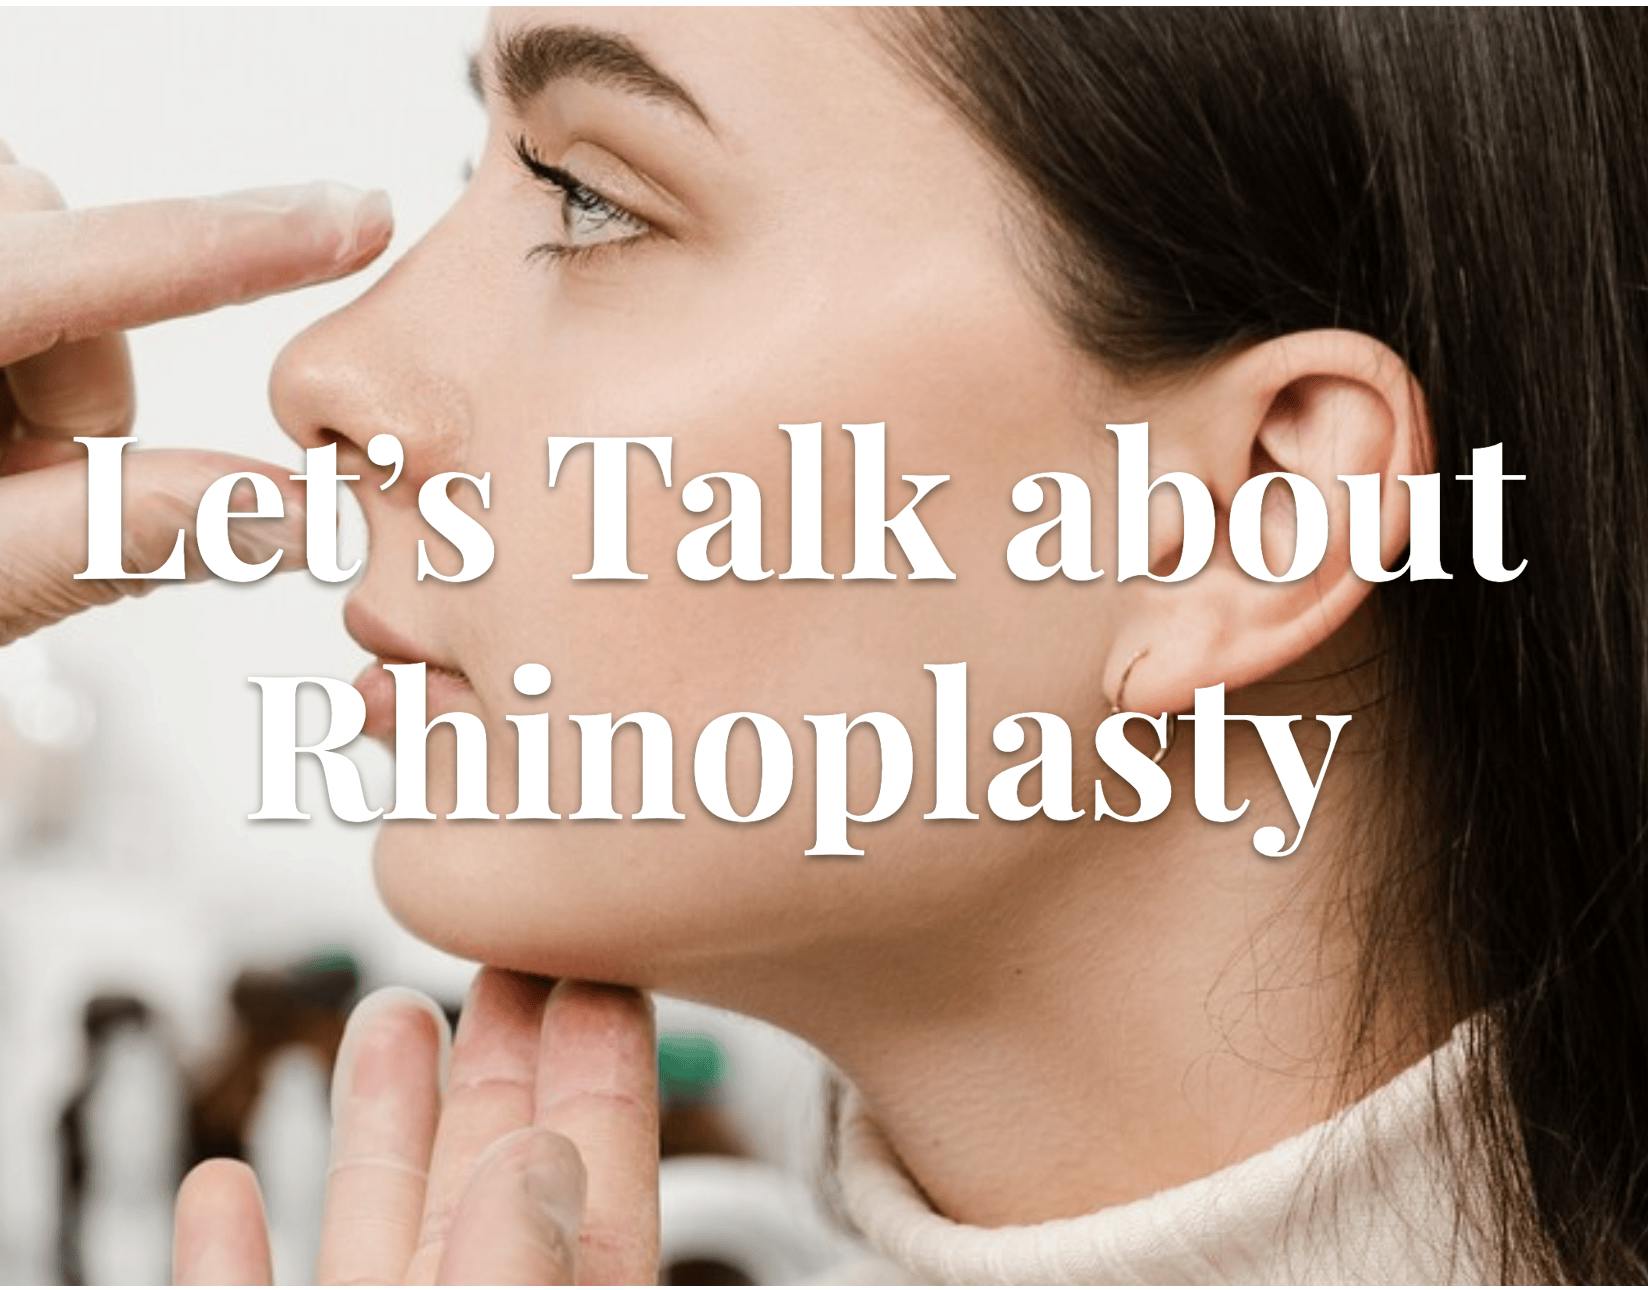 Let’s Talk about Rhinoplasty